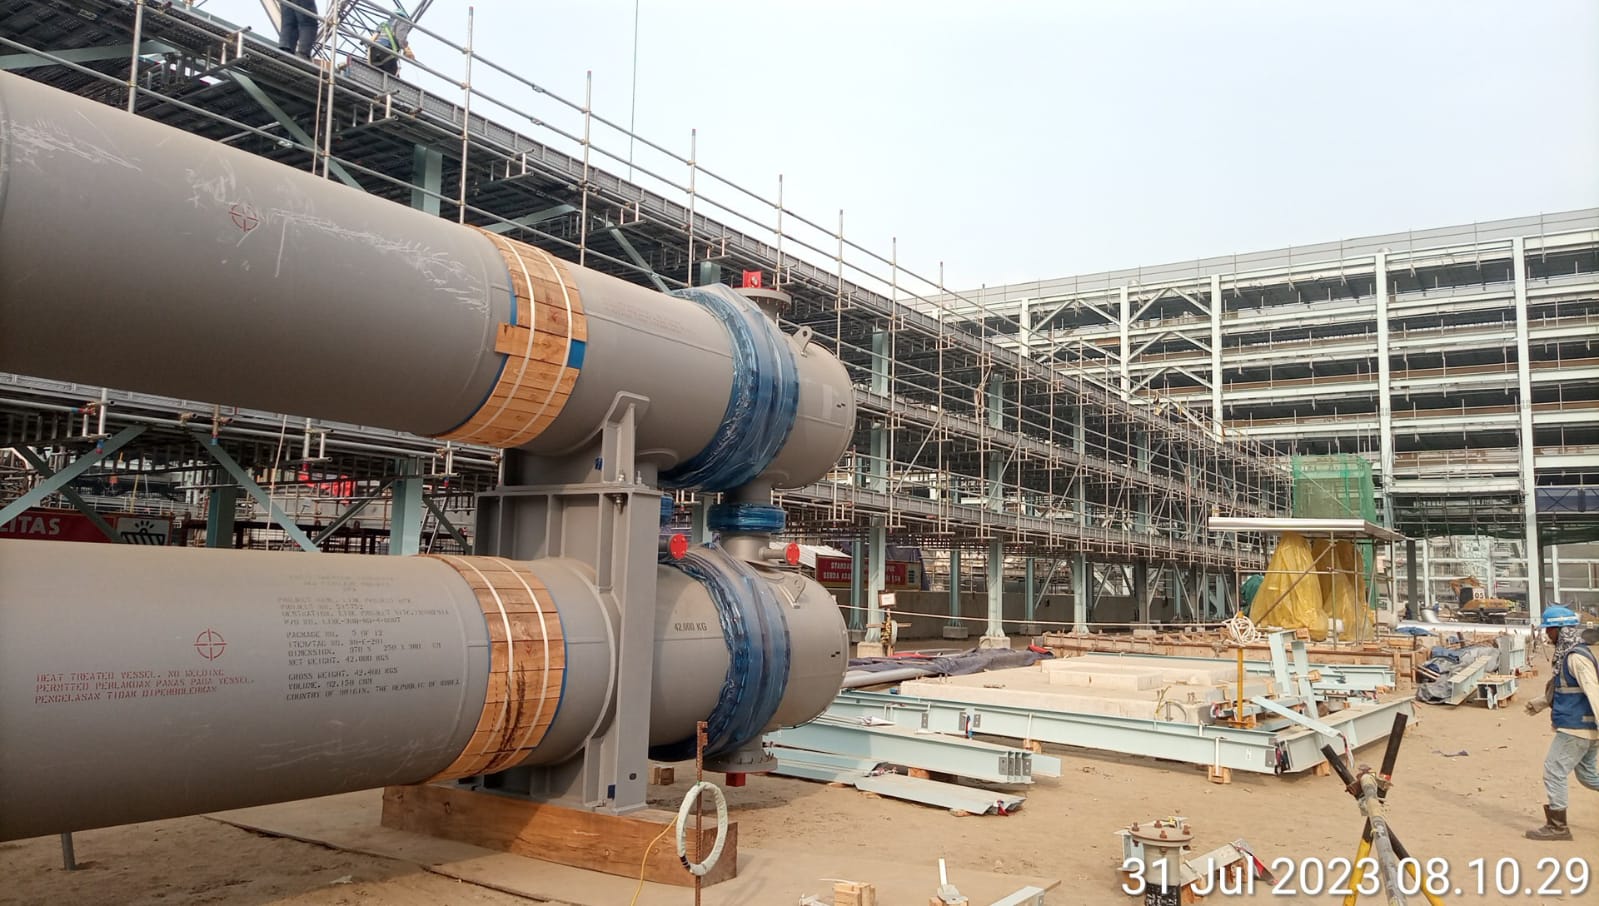 Swadaya Graha Project - Lotte Indonesia New Ethylene Complex Project-002